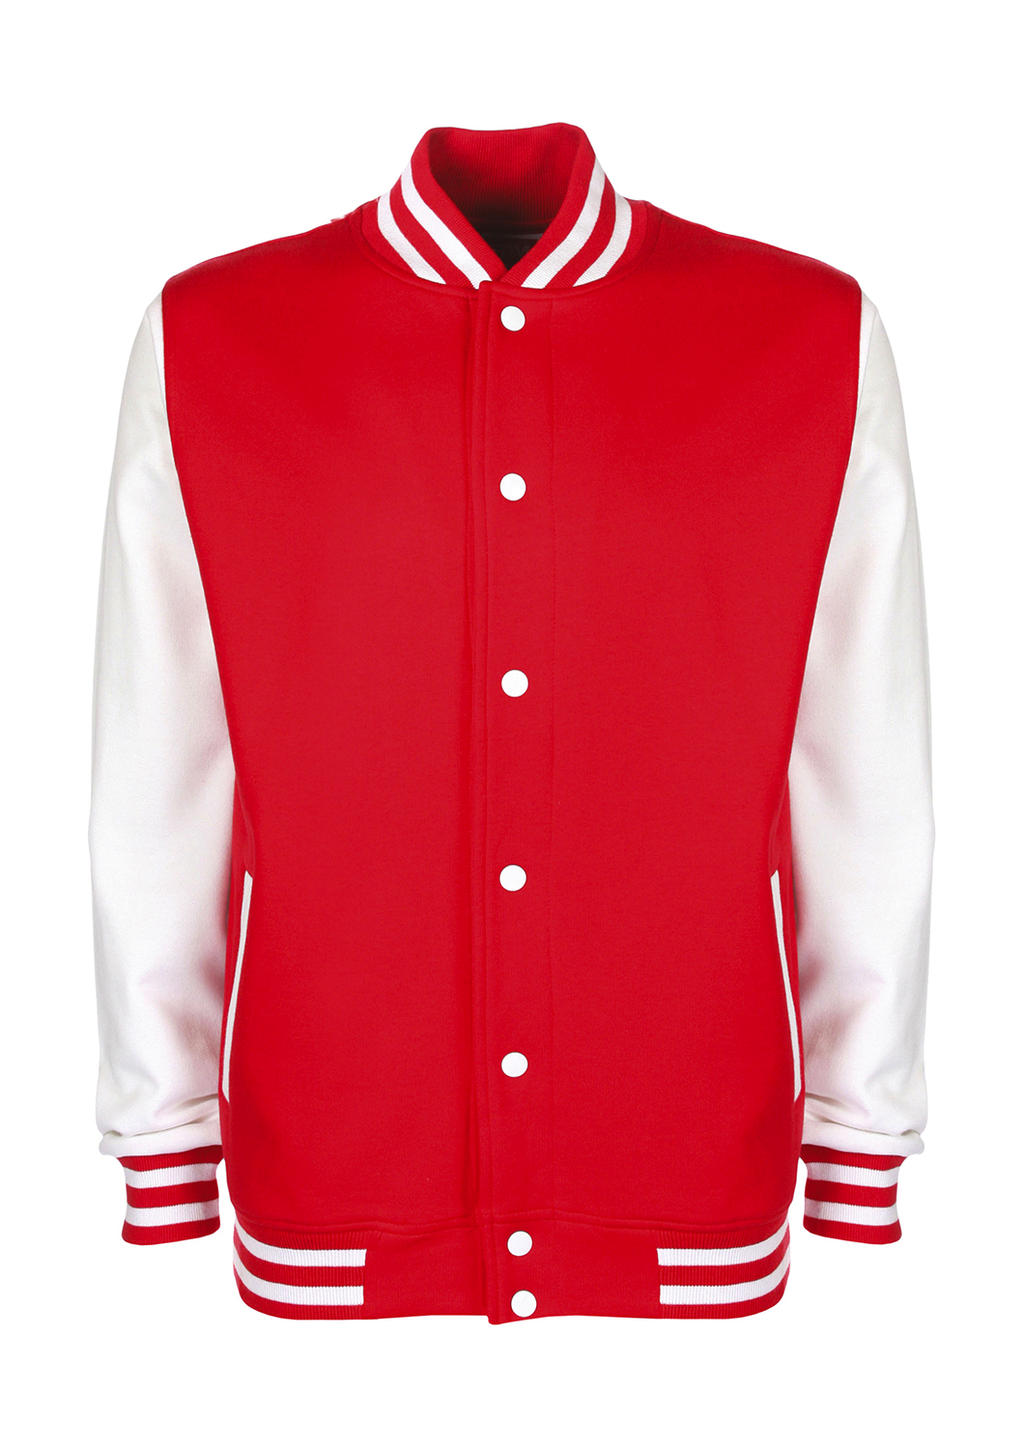  Varsity Jacket in Farbe Fire Red/White